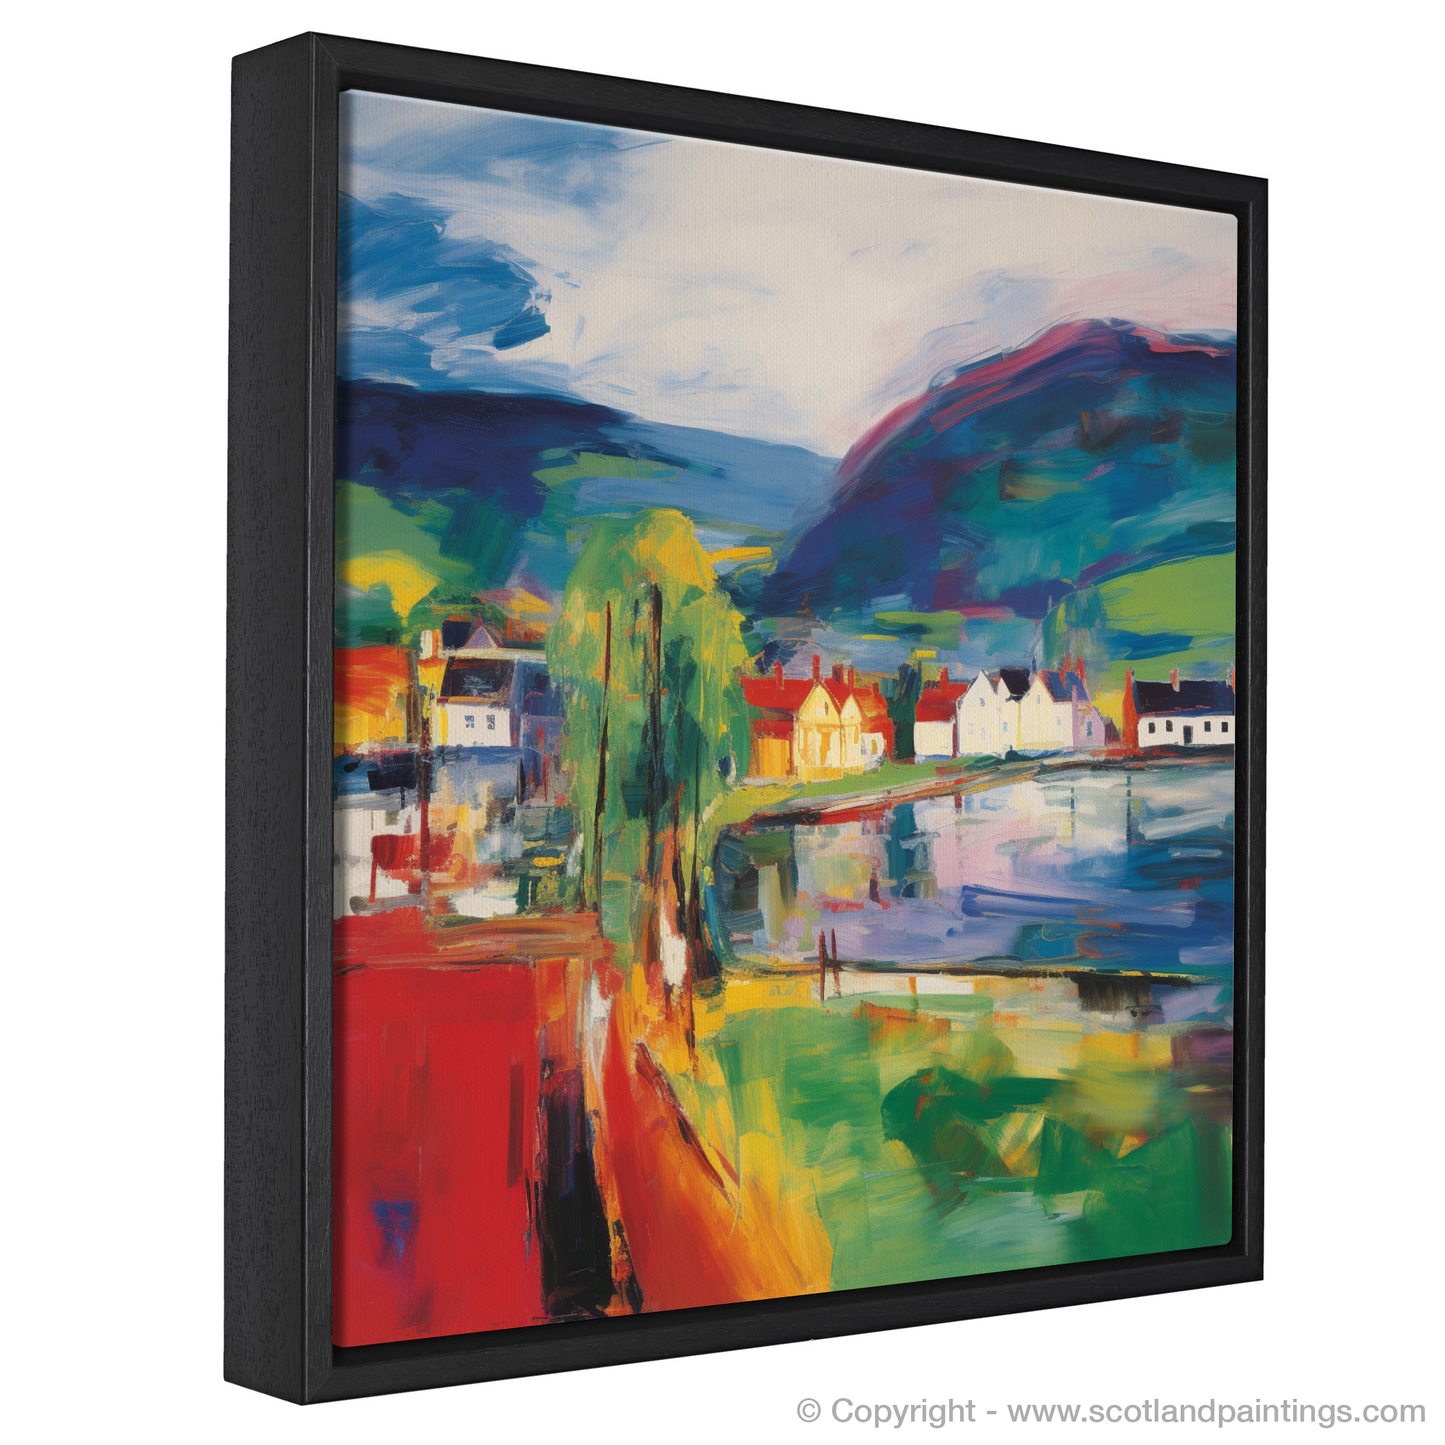 Inveraray Essence: An Abstract Expressionist Ode to a Scottish Village